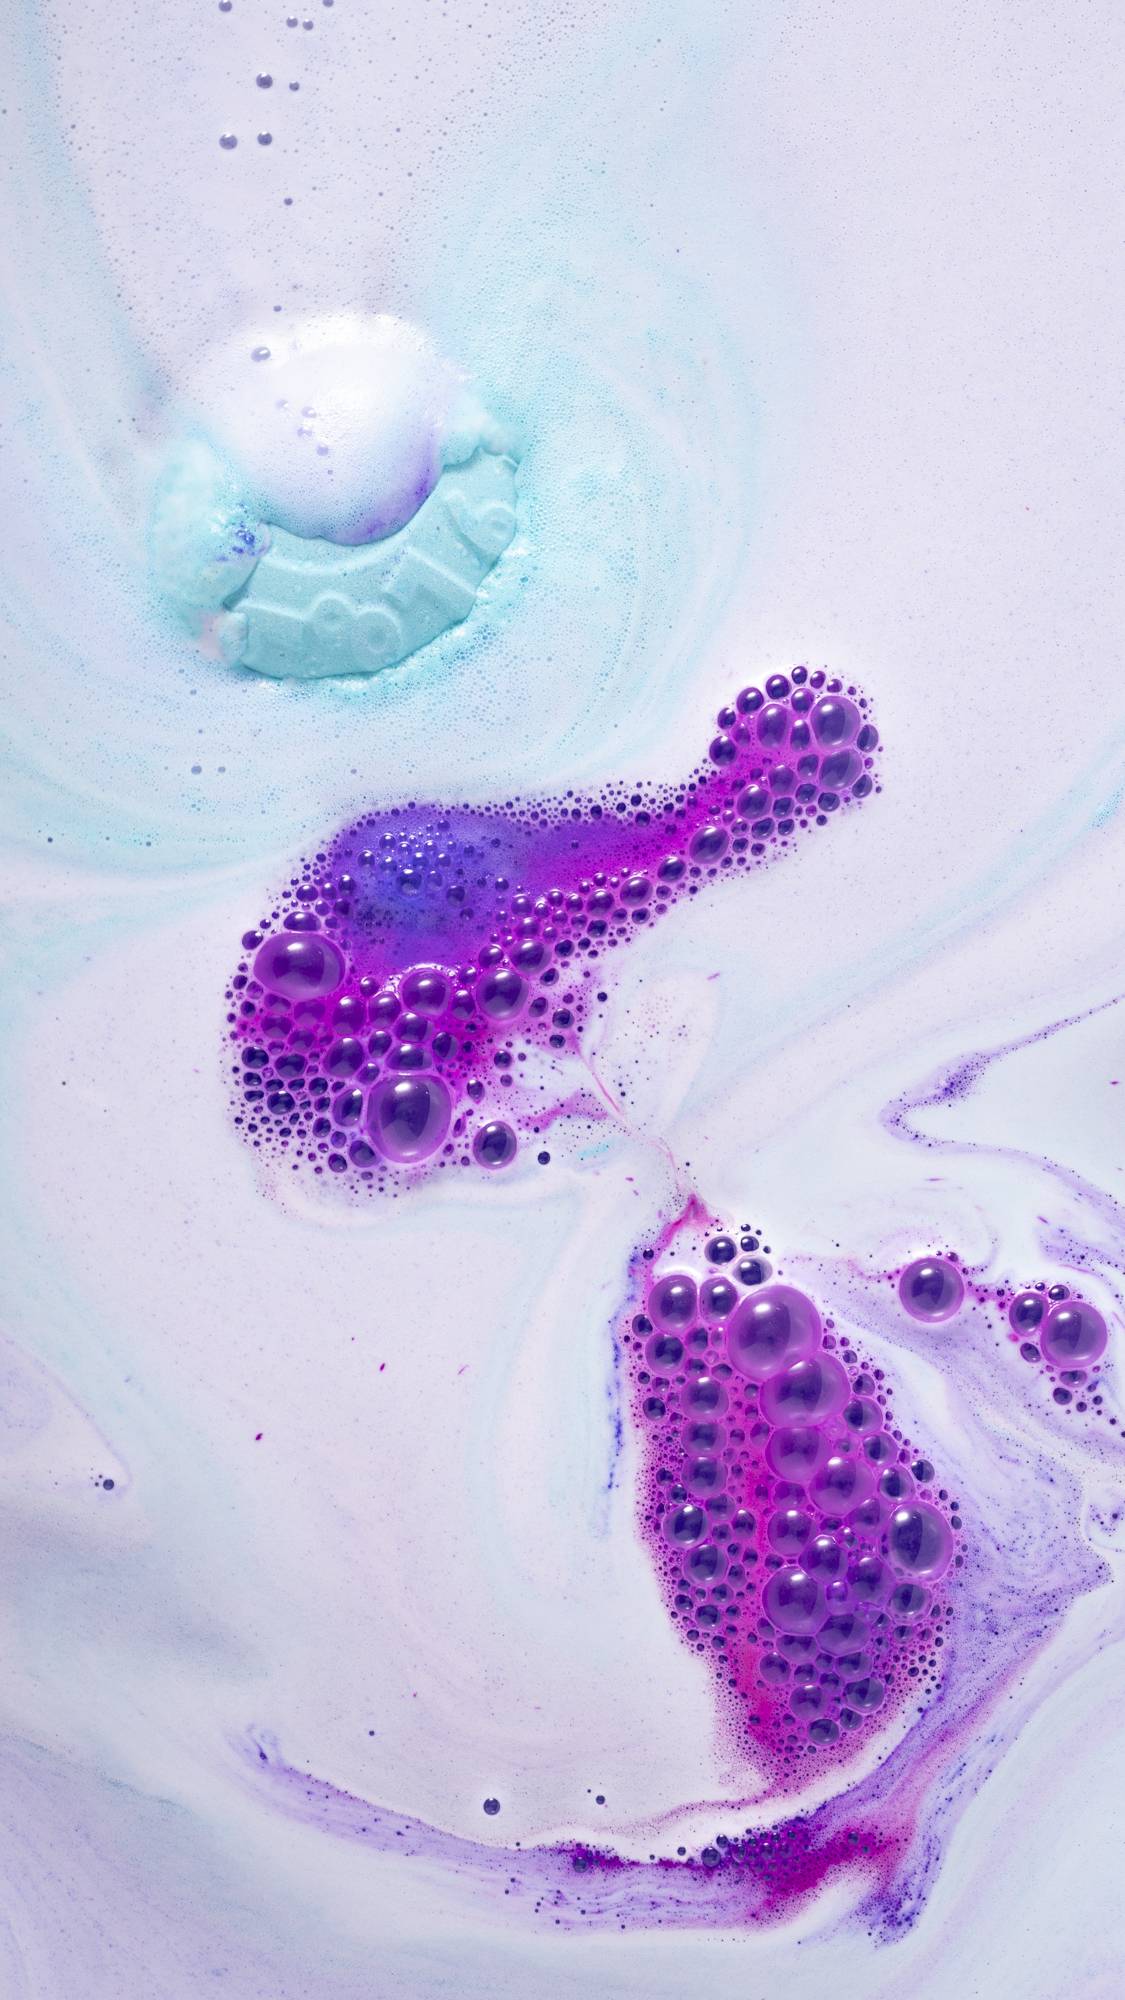 The bath bomb is dissolving leaving behind a galaxy of blue, pink and purple swirls. 